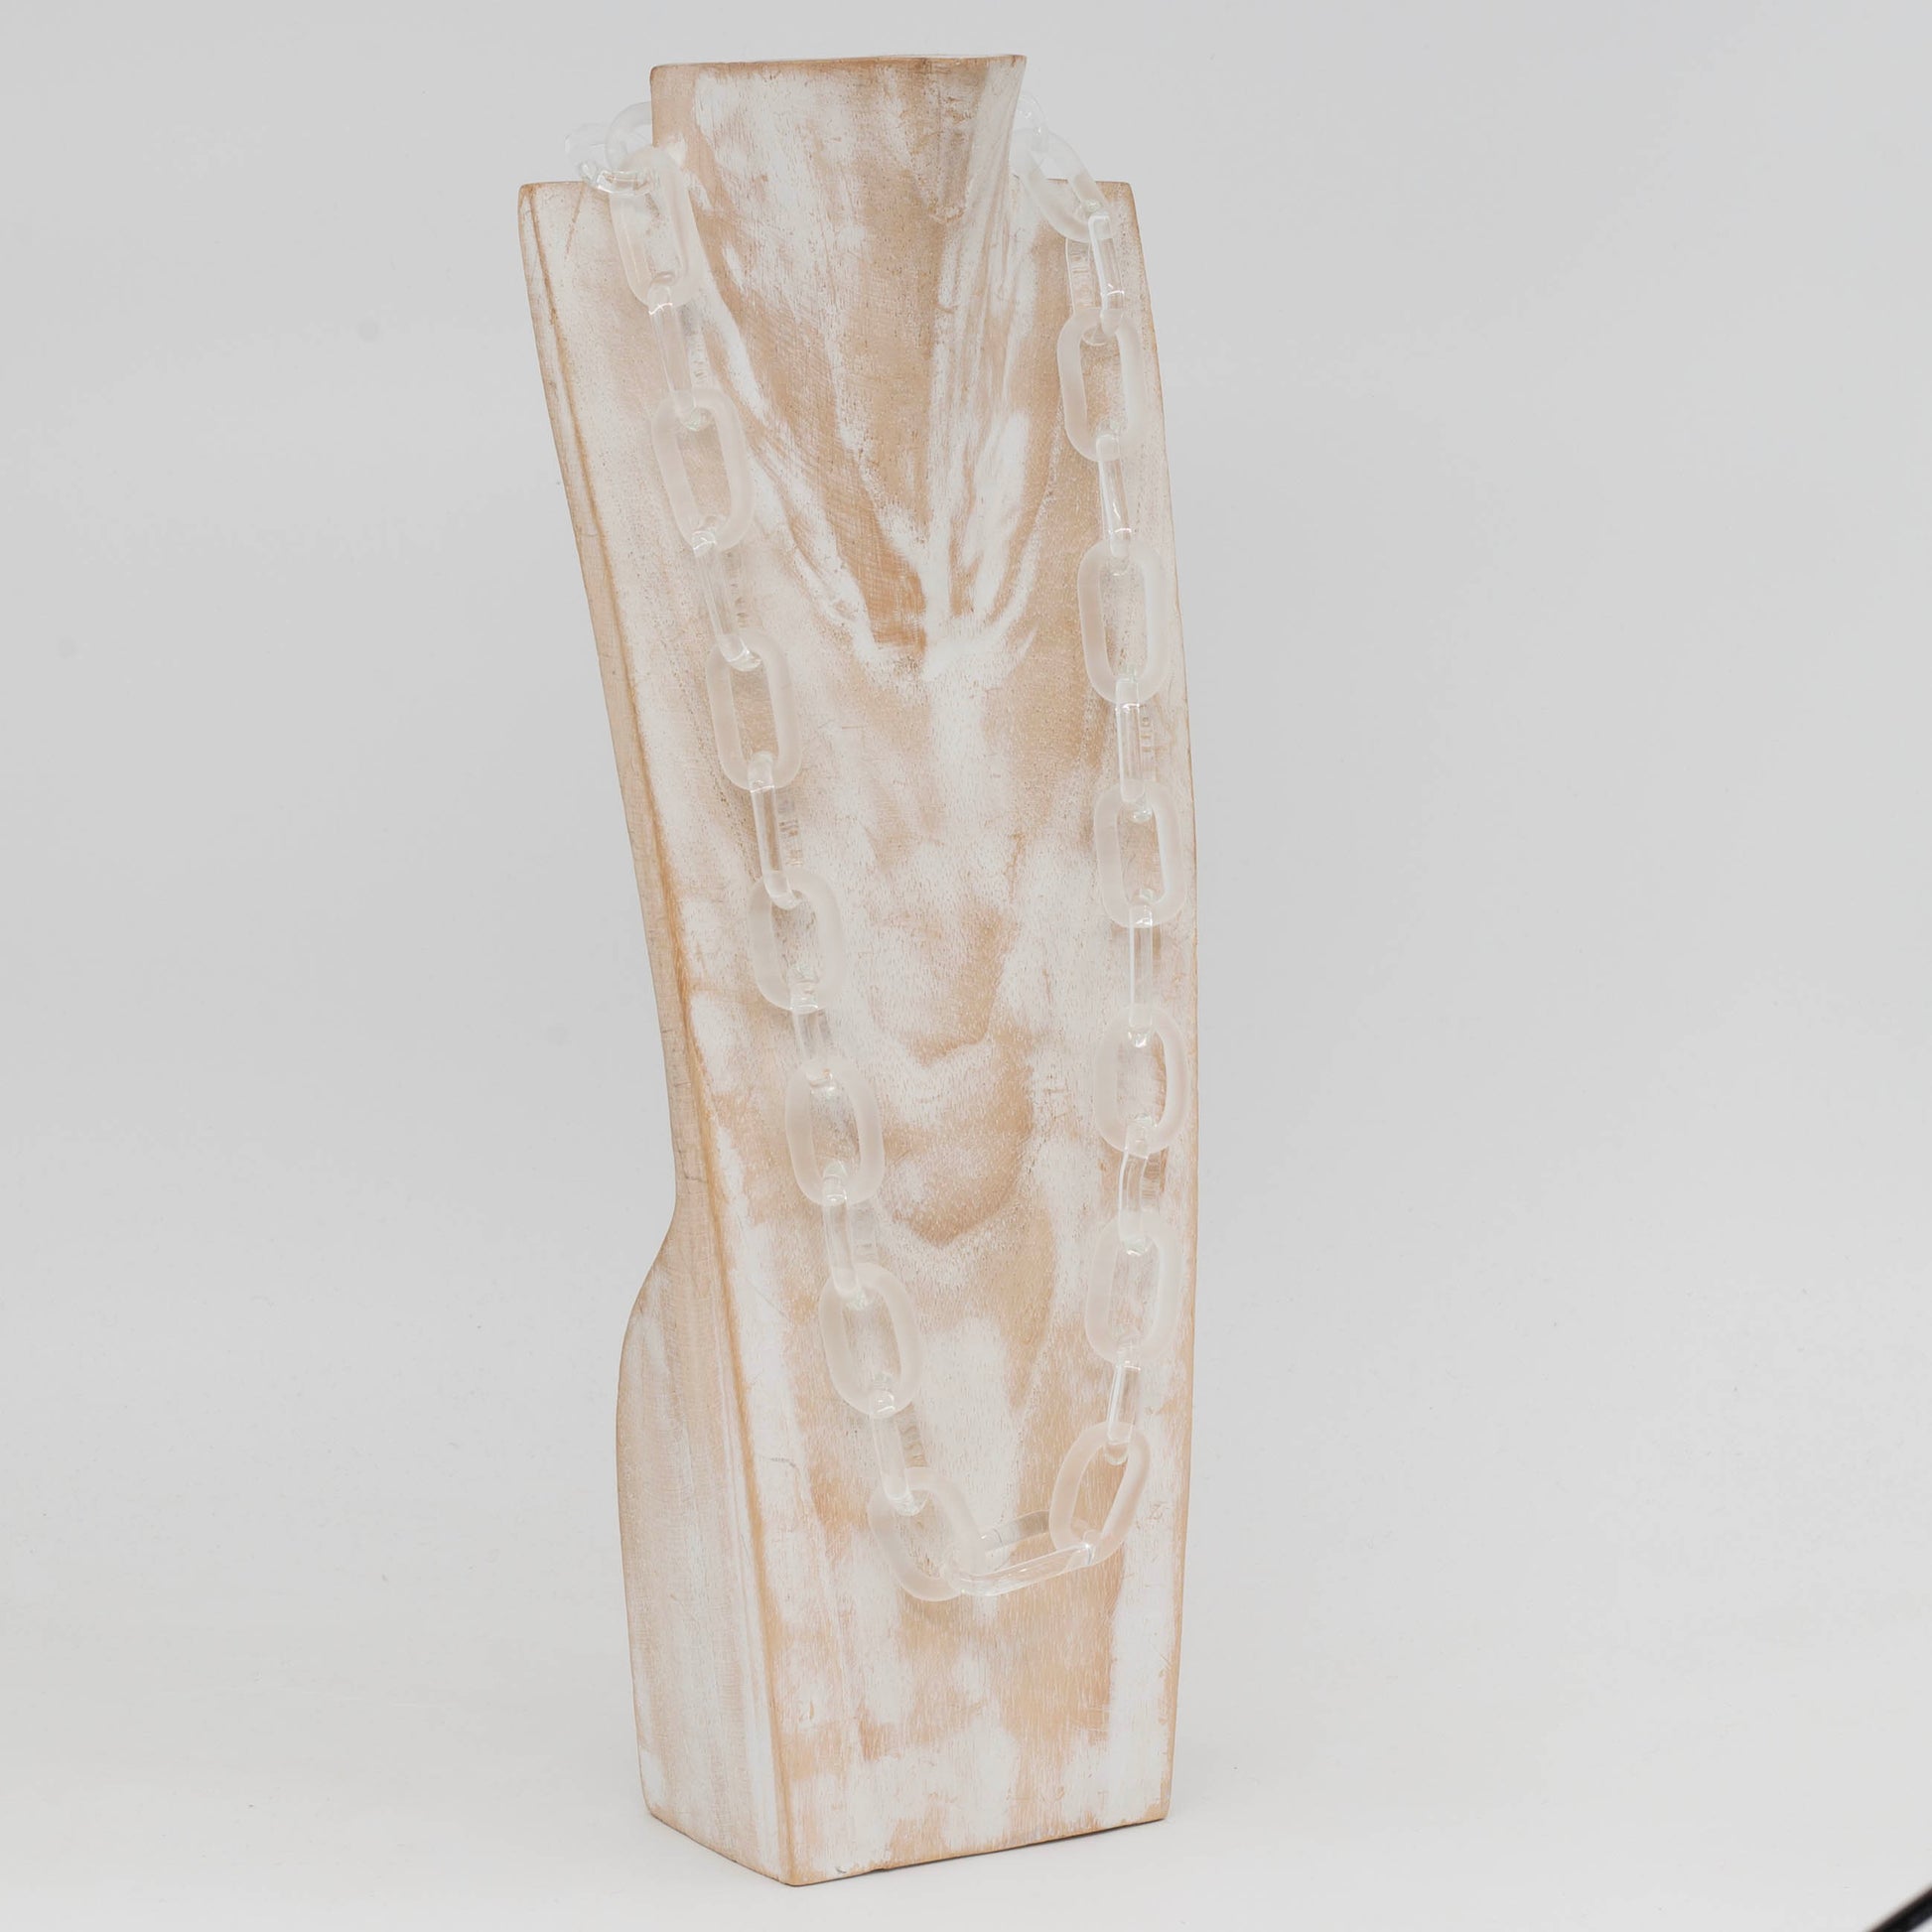 Side view of whitewashed wood torso glass displaying necklace made with bold links of alternating clear and frosted glass